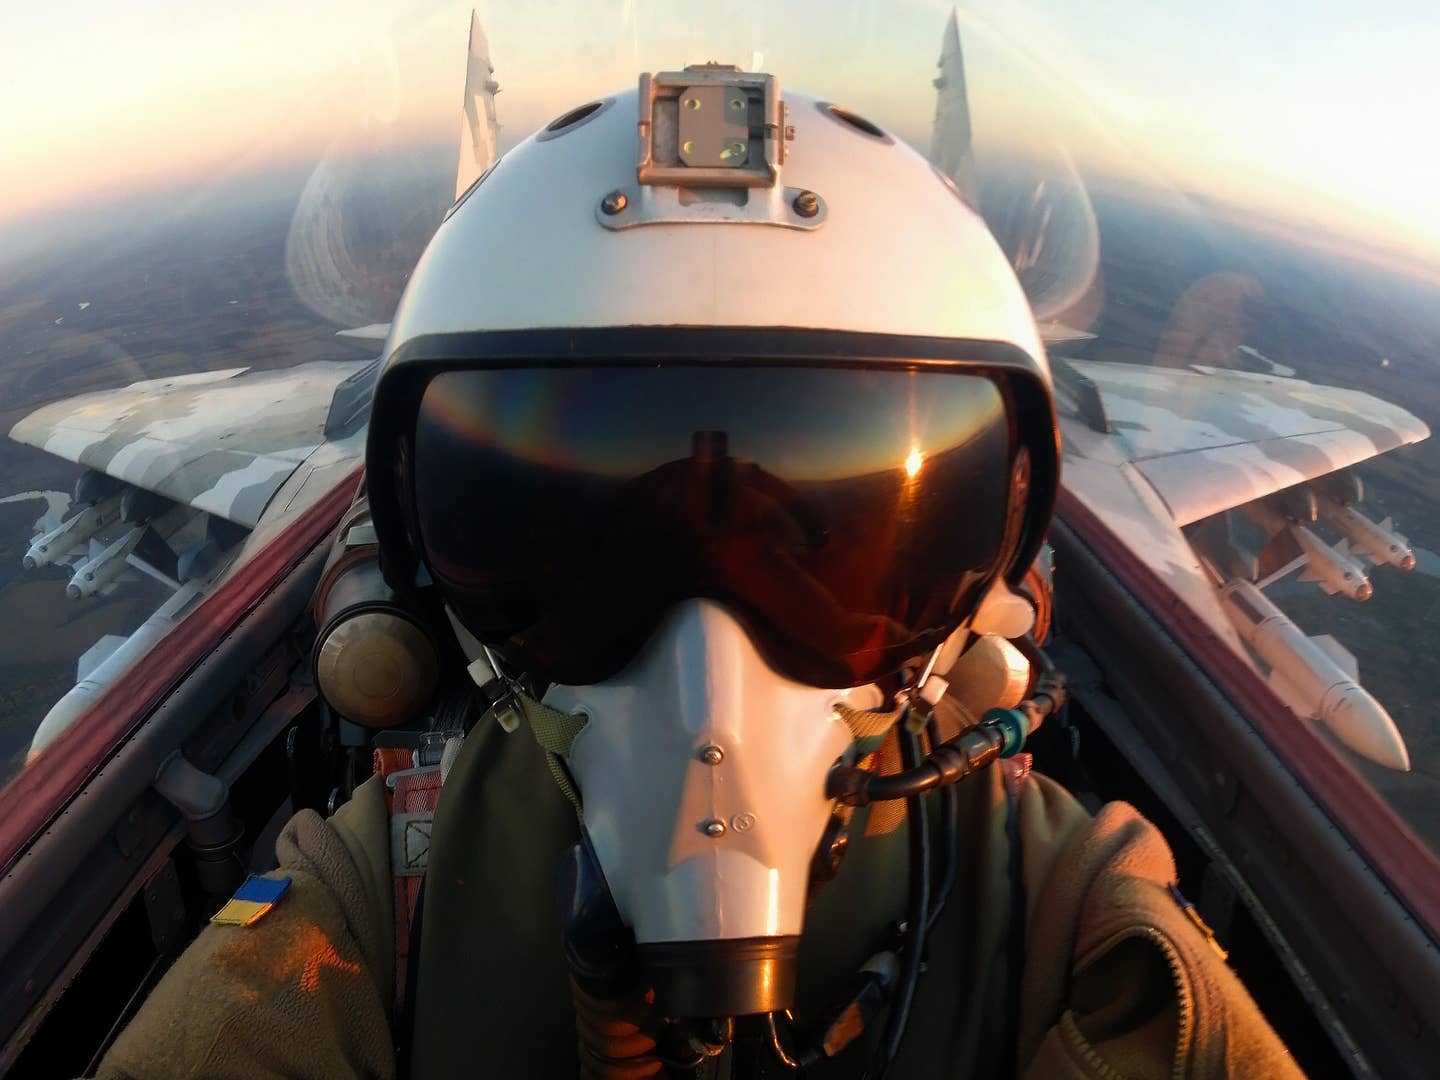 A selfie from the cockpit as Juice flies a MiG-29 fully armed with two R-27R and four R-73 air-to-air missiles.&nbsp;<em>Juice/Ukrainian Air Force</em>